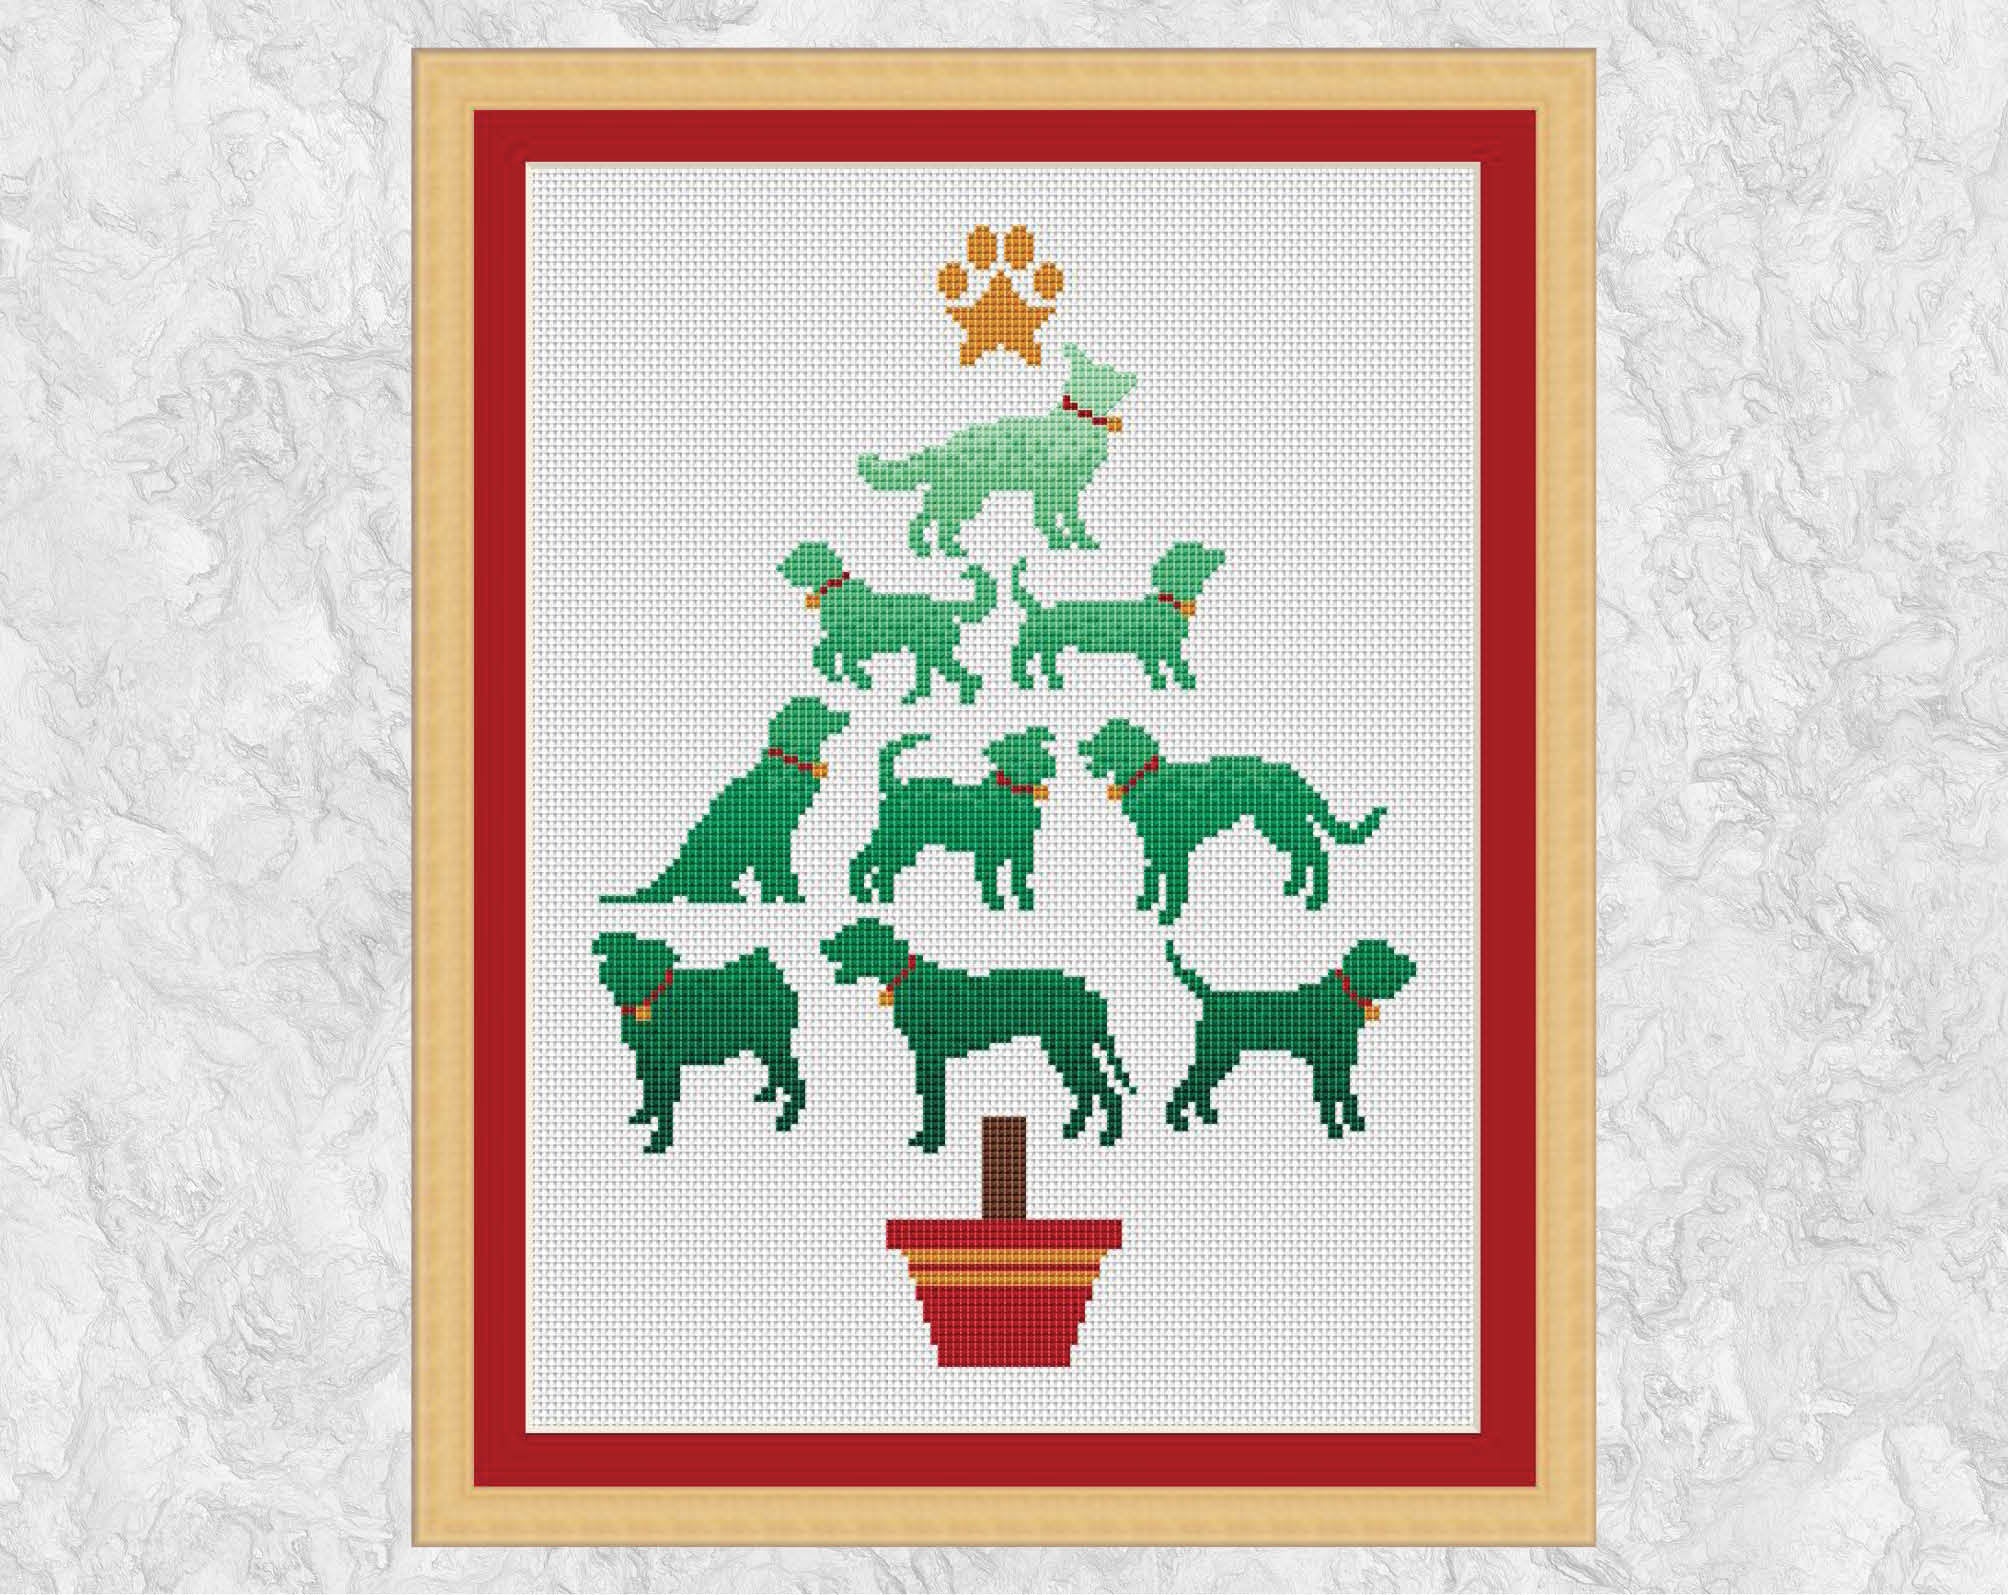 Cross stitch pattern PDF of a Christmas tree made up of dog breeds - perfect for any dog lover! Shown with frame.